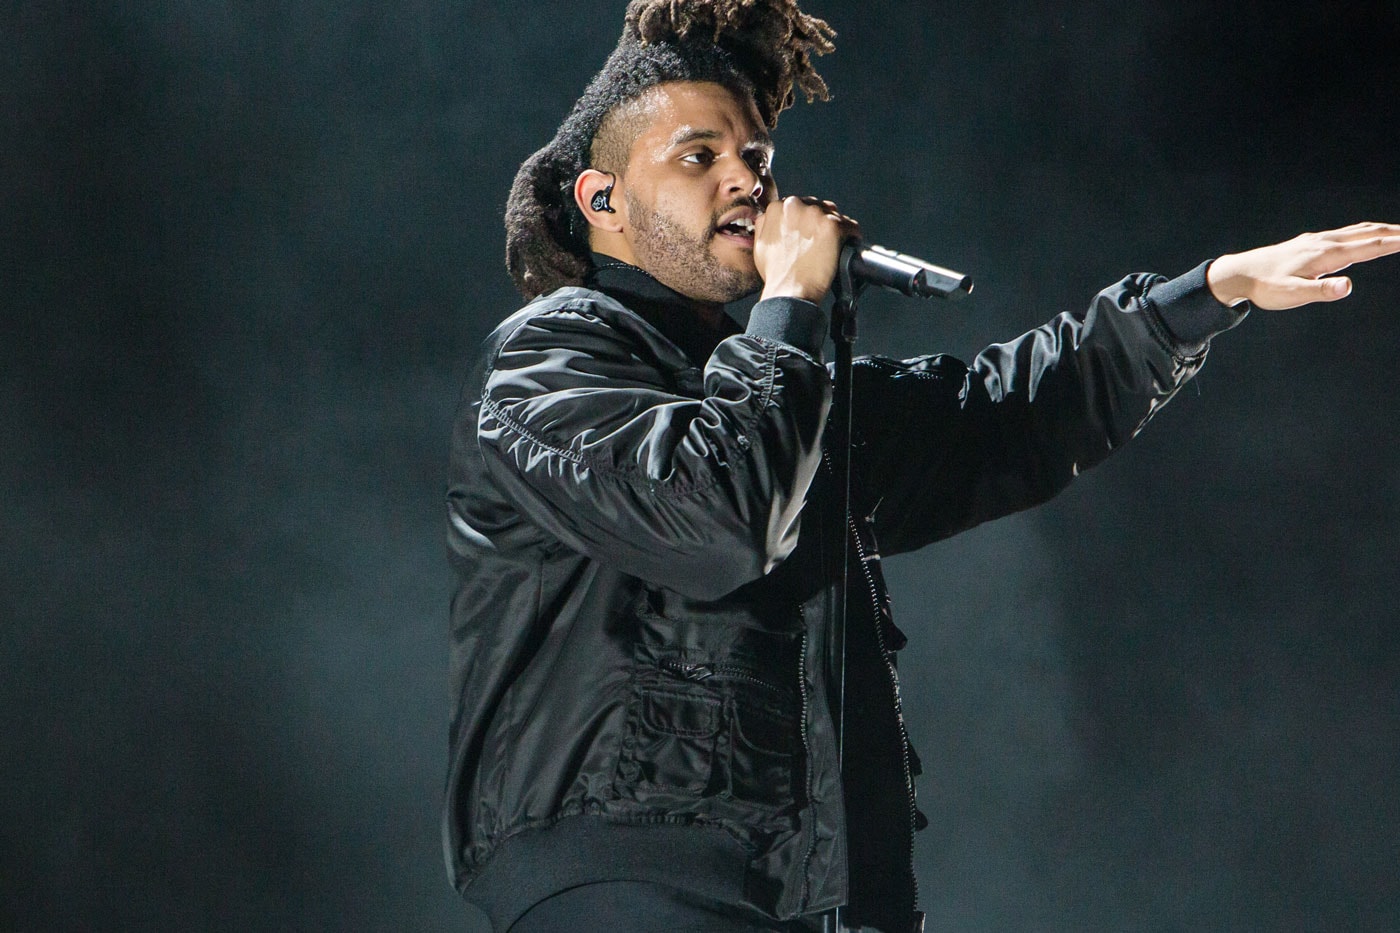 The Weeknd Set to Perform On 'Saturday Night Live'